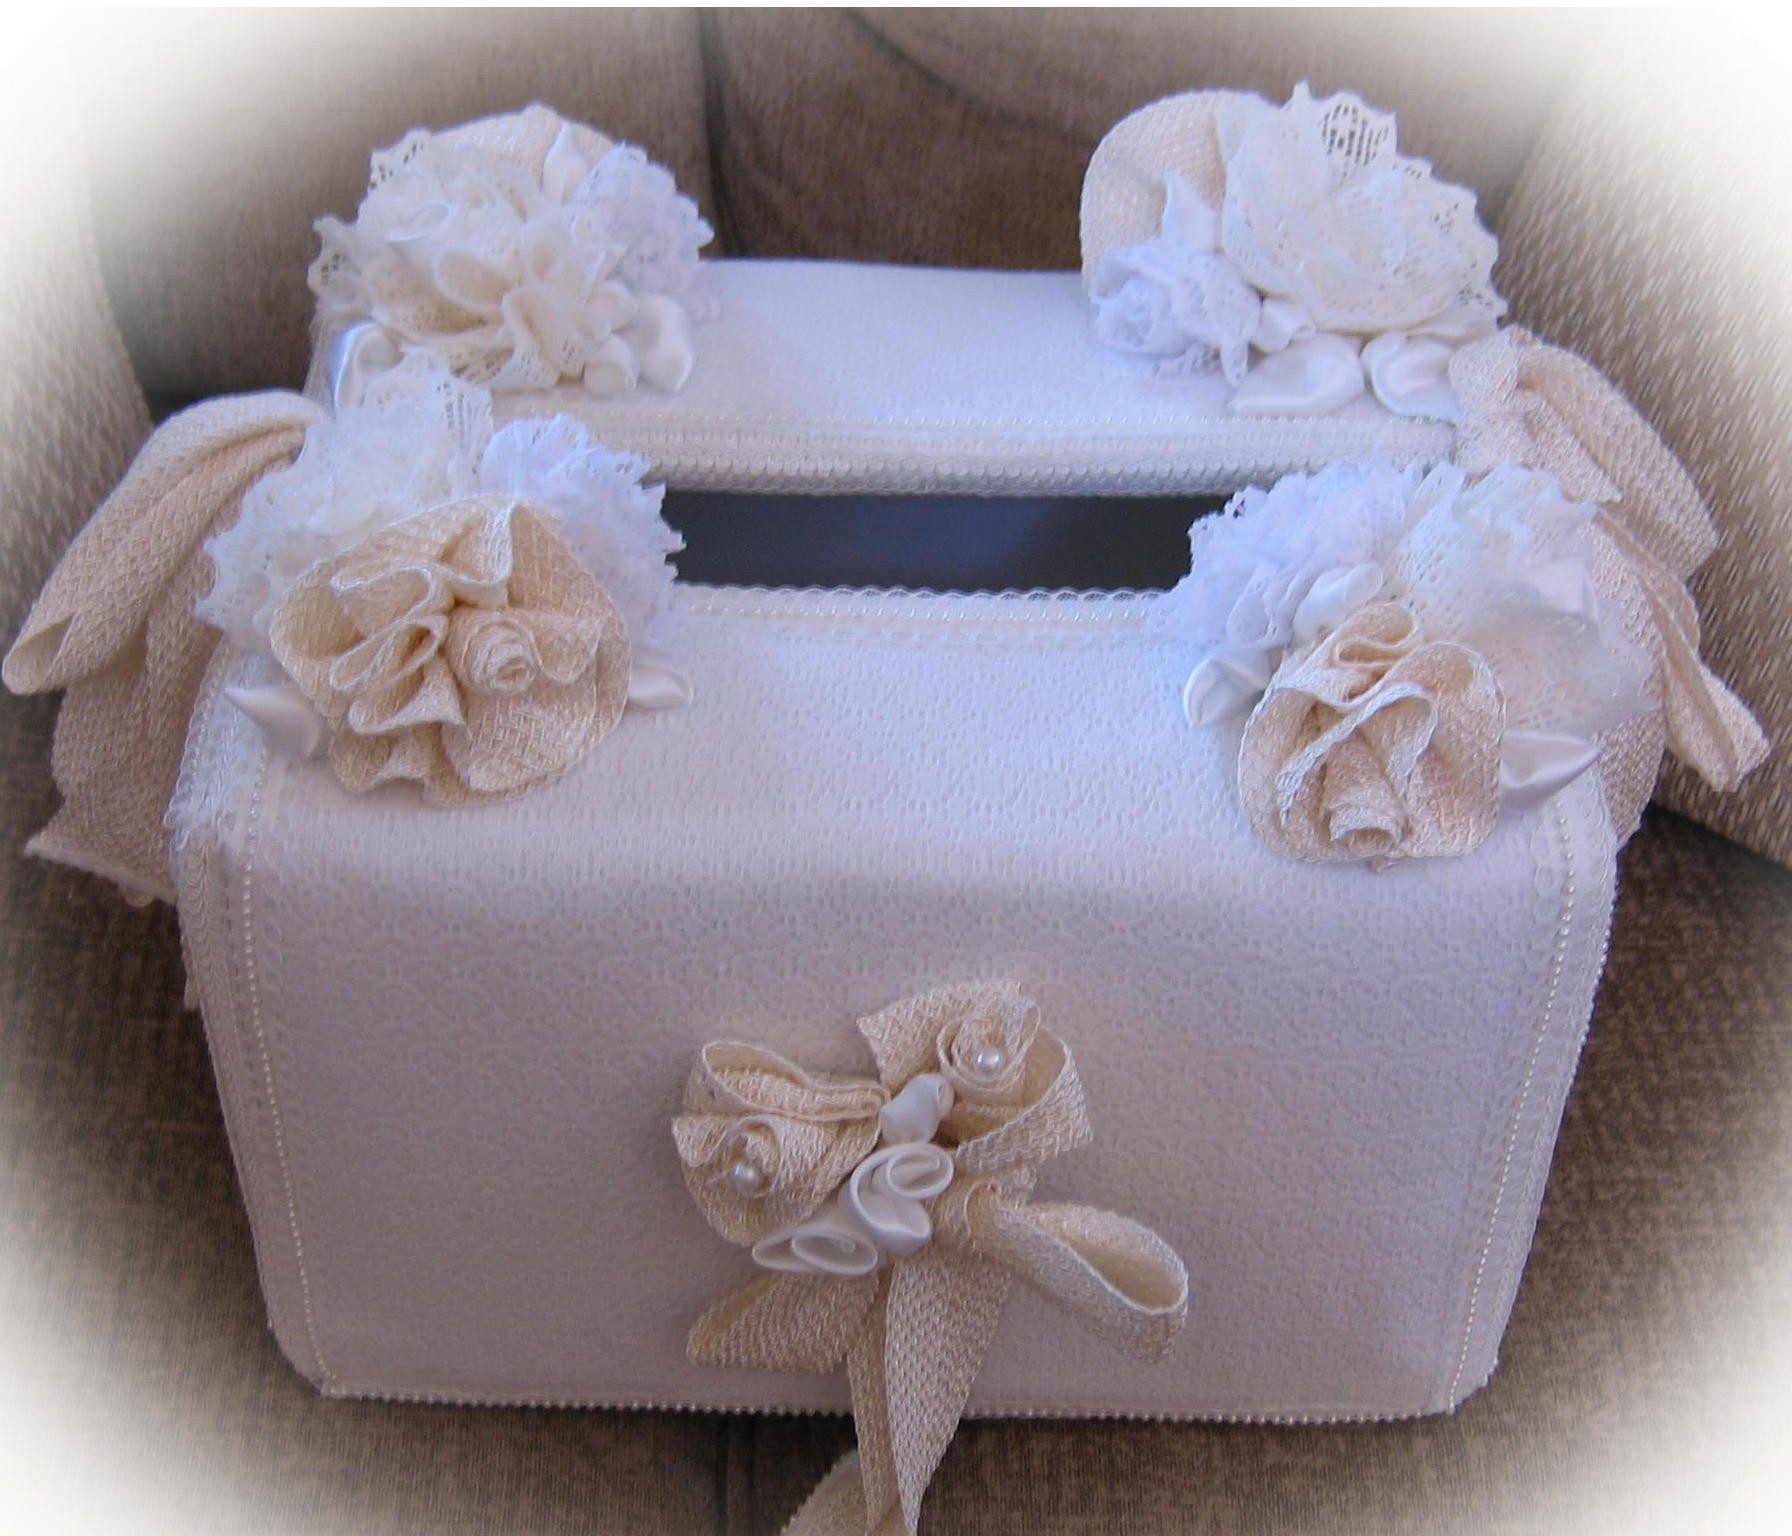 Wedding Gift Boxes For Cards
 Wedding Gift Card Boxes